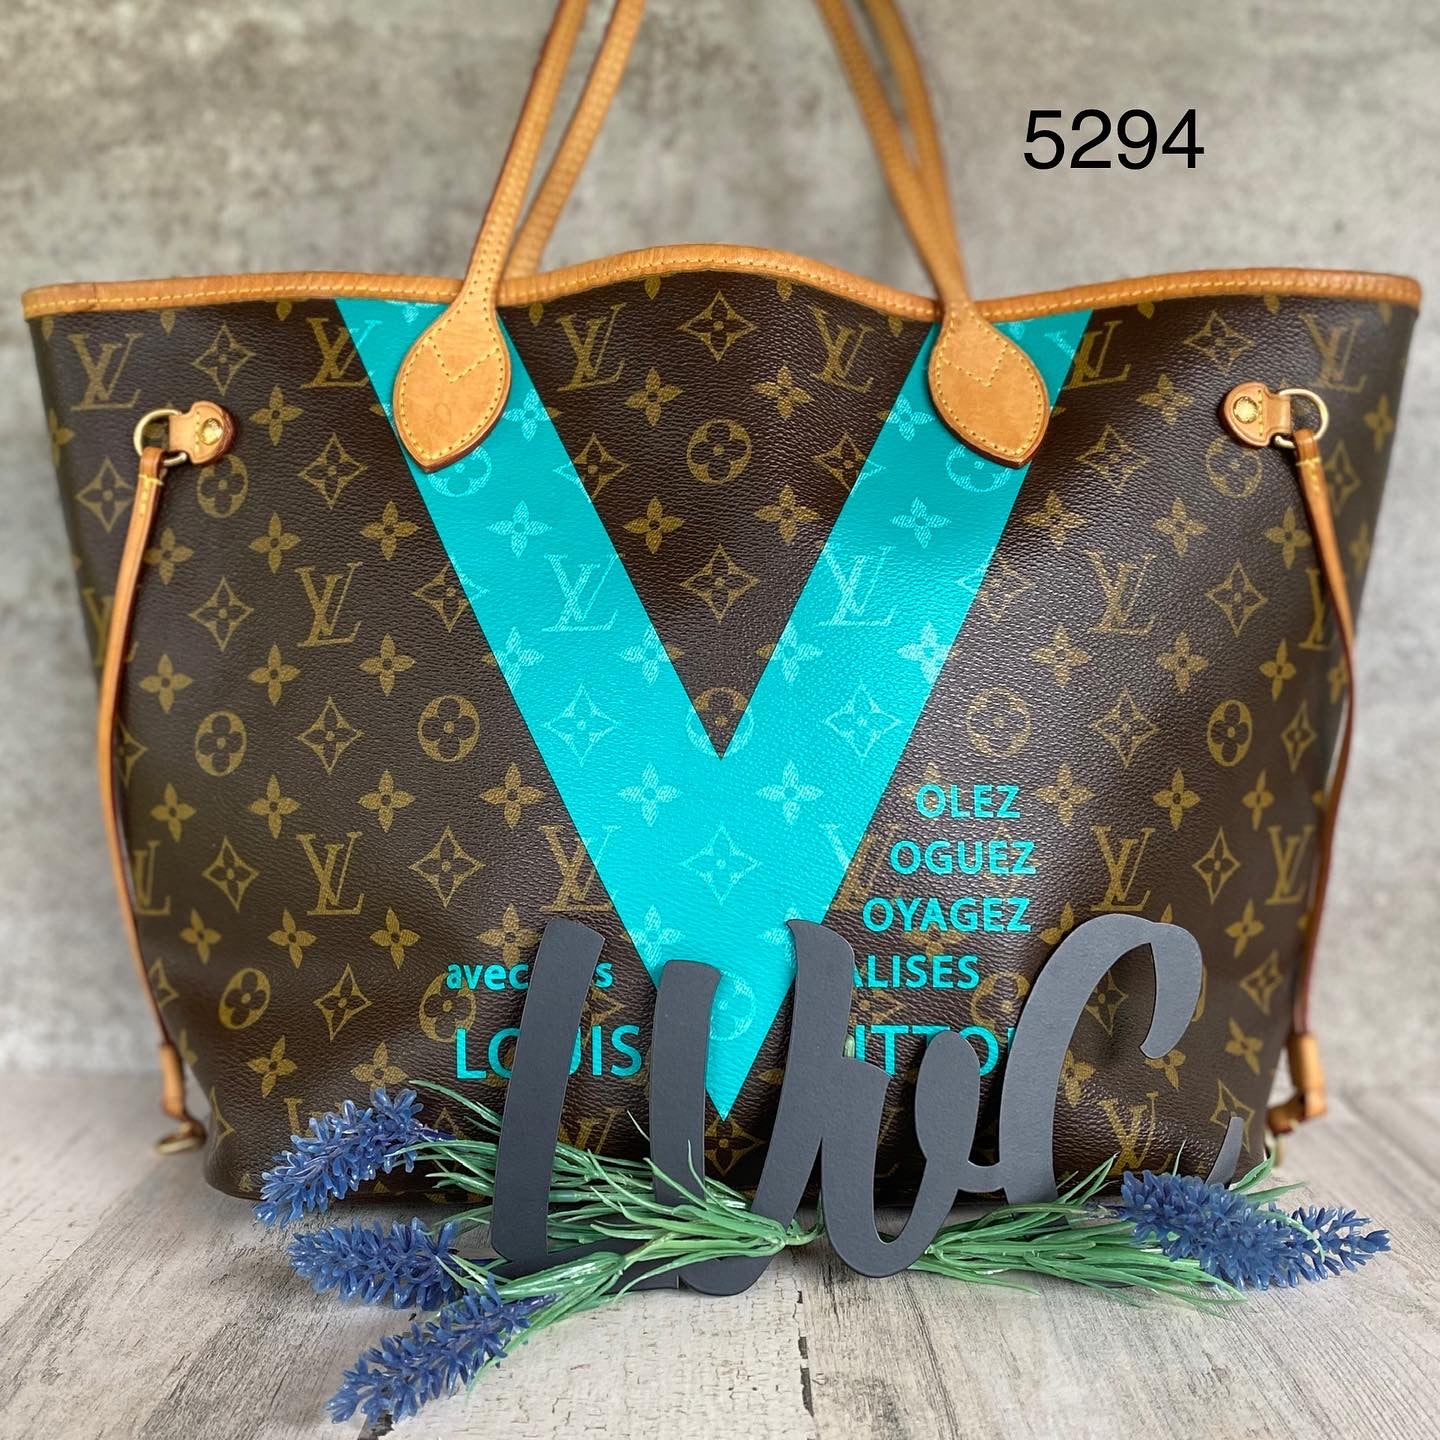 Preloved Limited Edition Louis Vuitton Since 1854 Neverfull MM